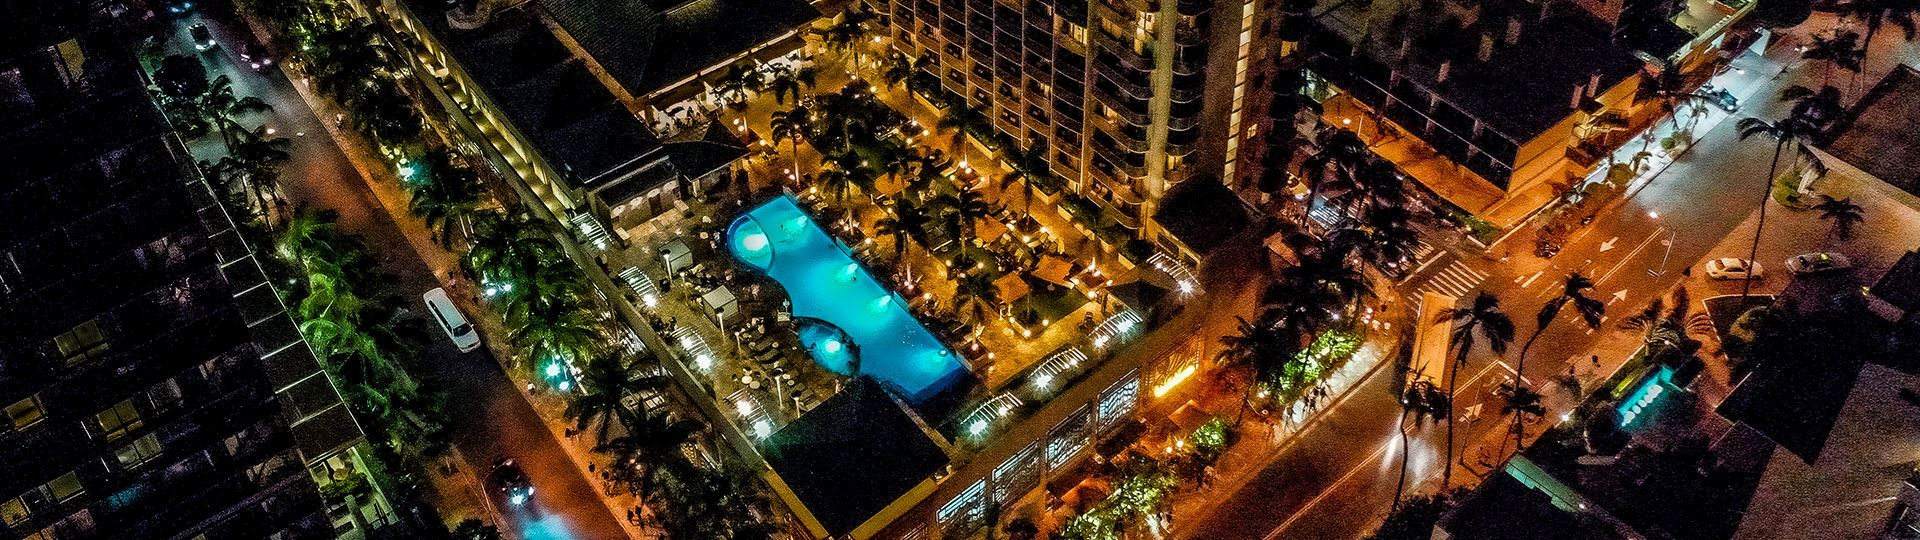 Sleep In Paradise At Our Waikiki All-suite Hotel